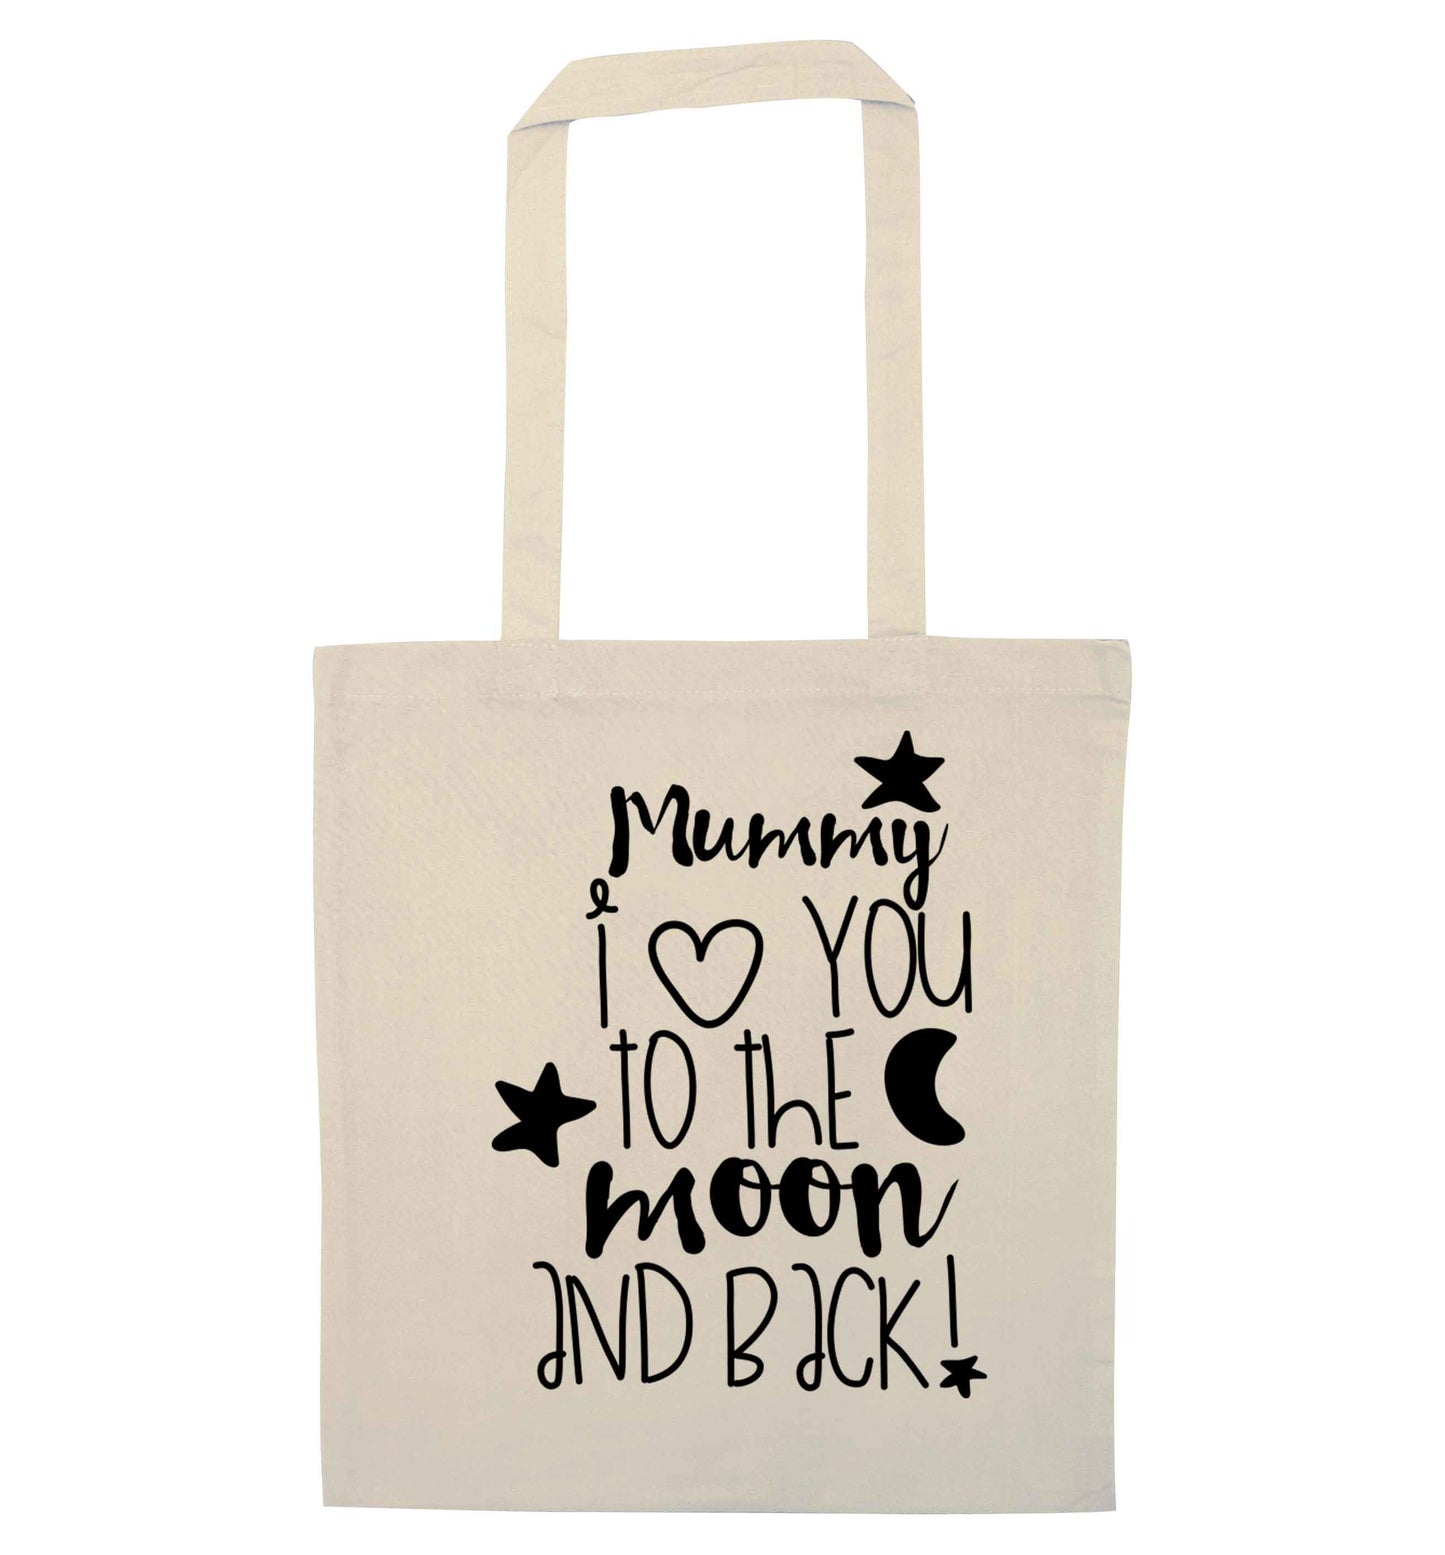 Mummy I love you to the moon and back natural tote bag